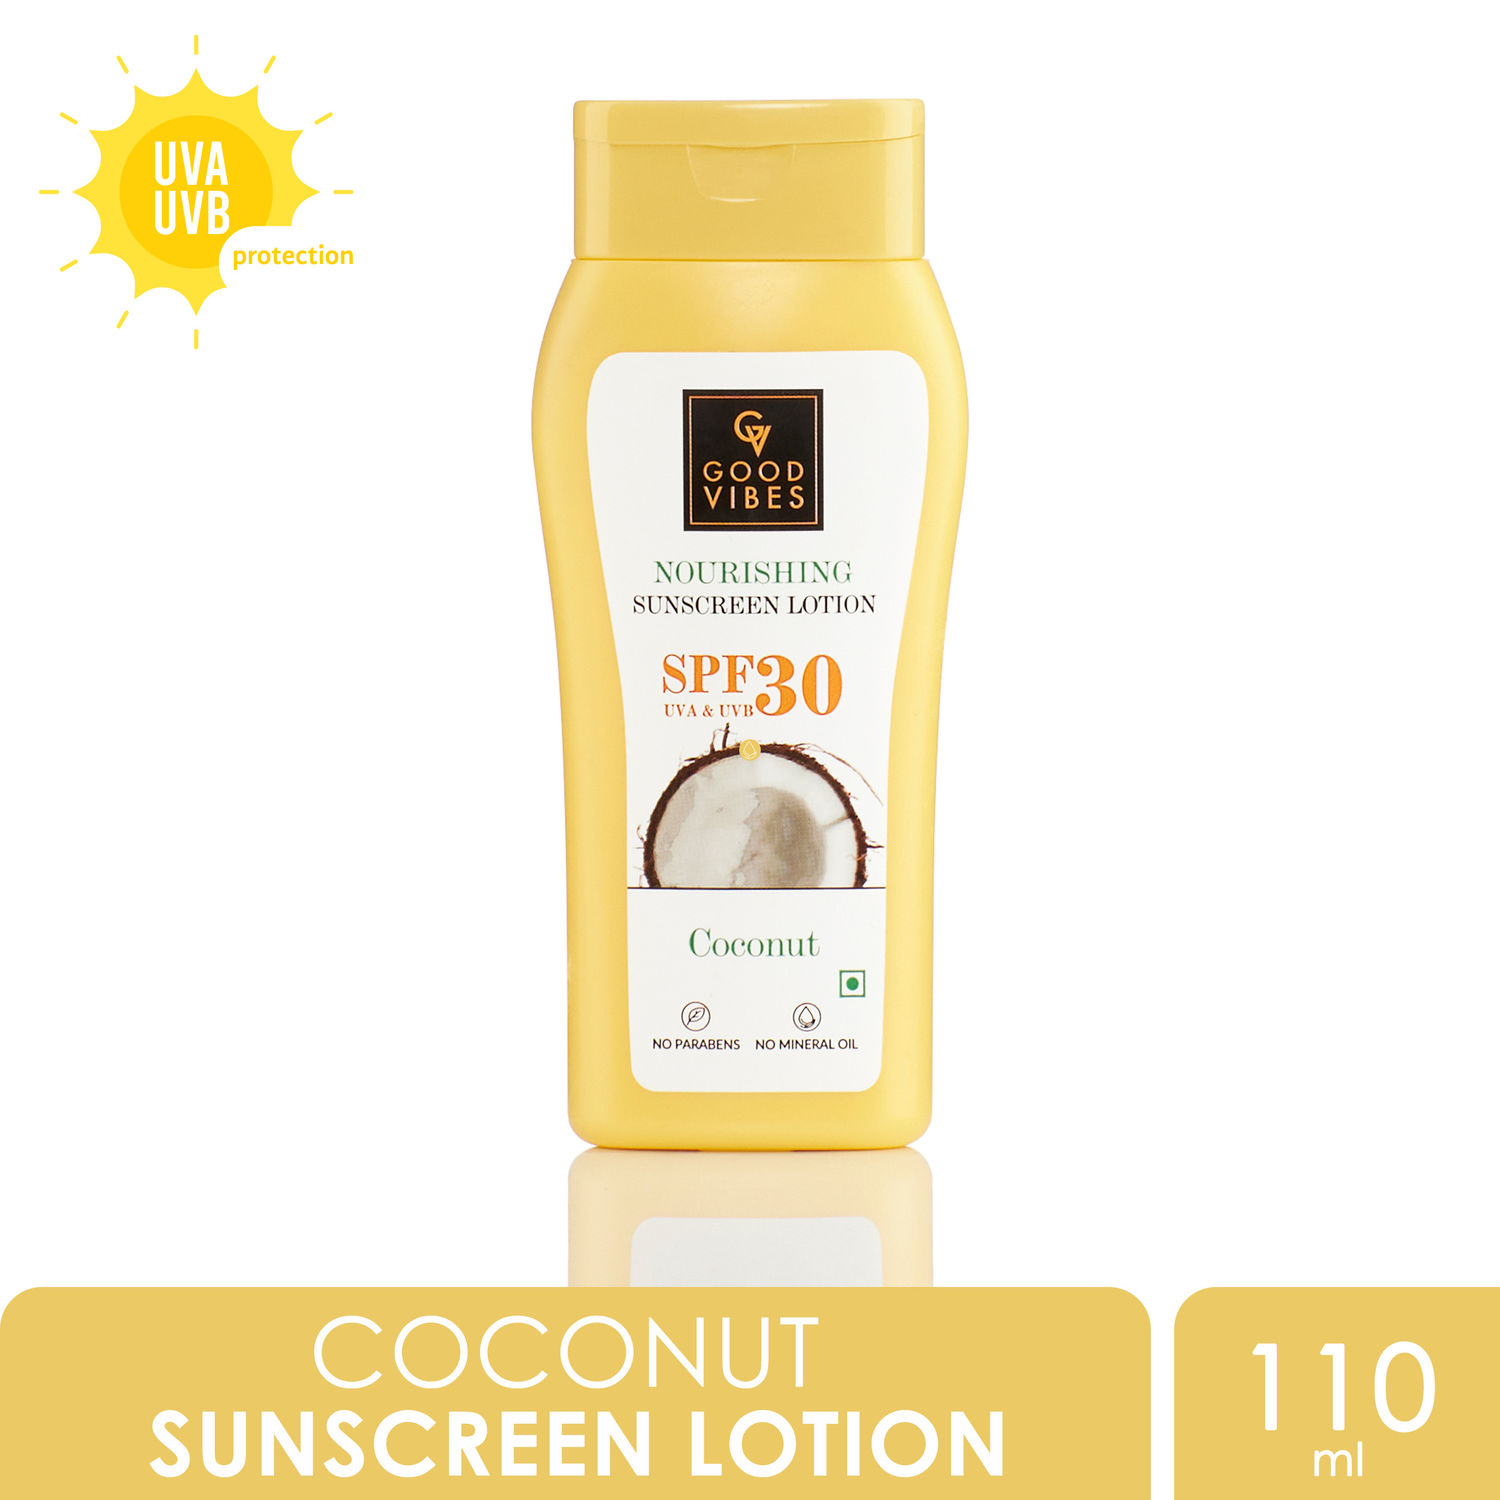 Good Vibes Coconut Nourishing Sunscreen Lotion SPF 30, With Lime & Rosemary Leaf Oil, Vegan, No Parabens, No Mineral Oil, No Silicones (110 ml)